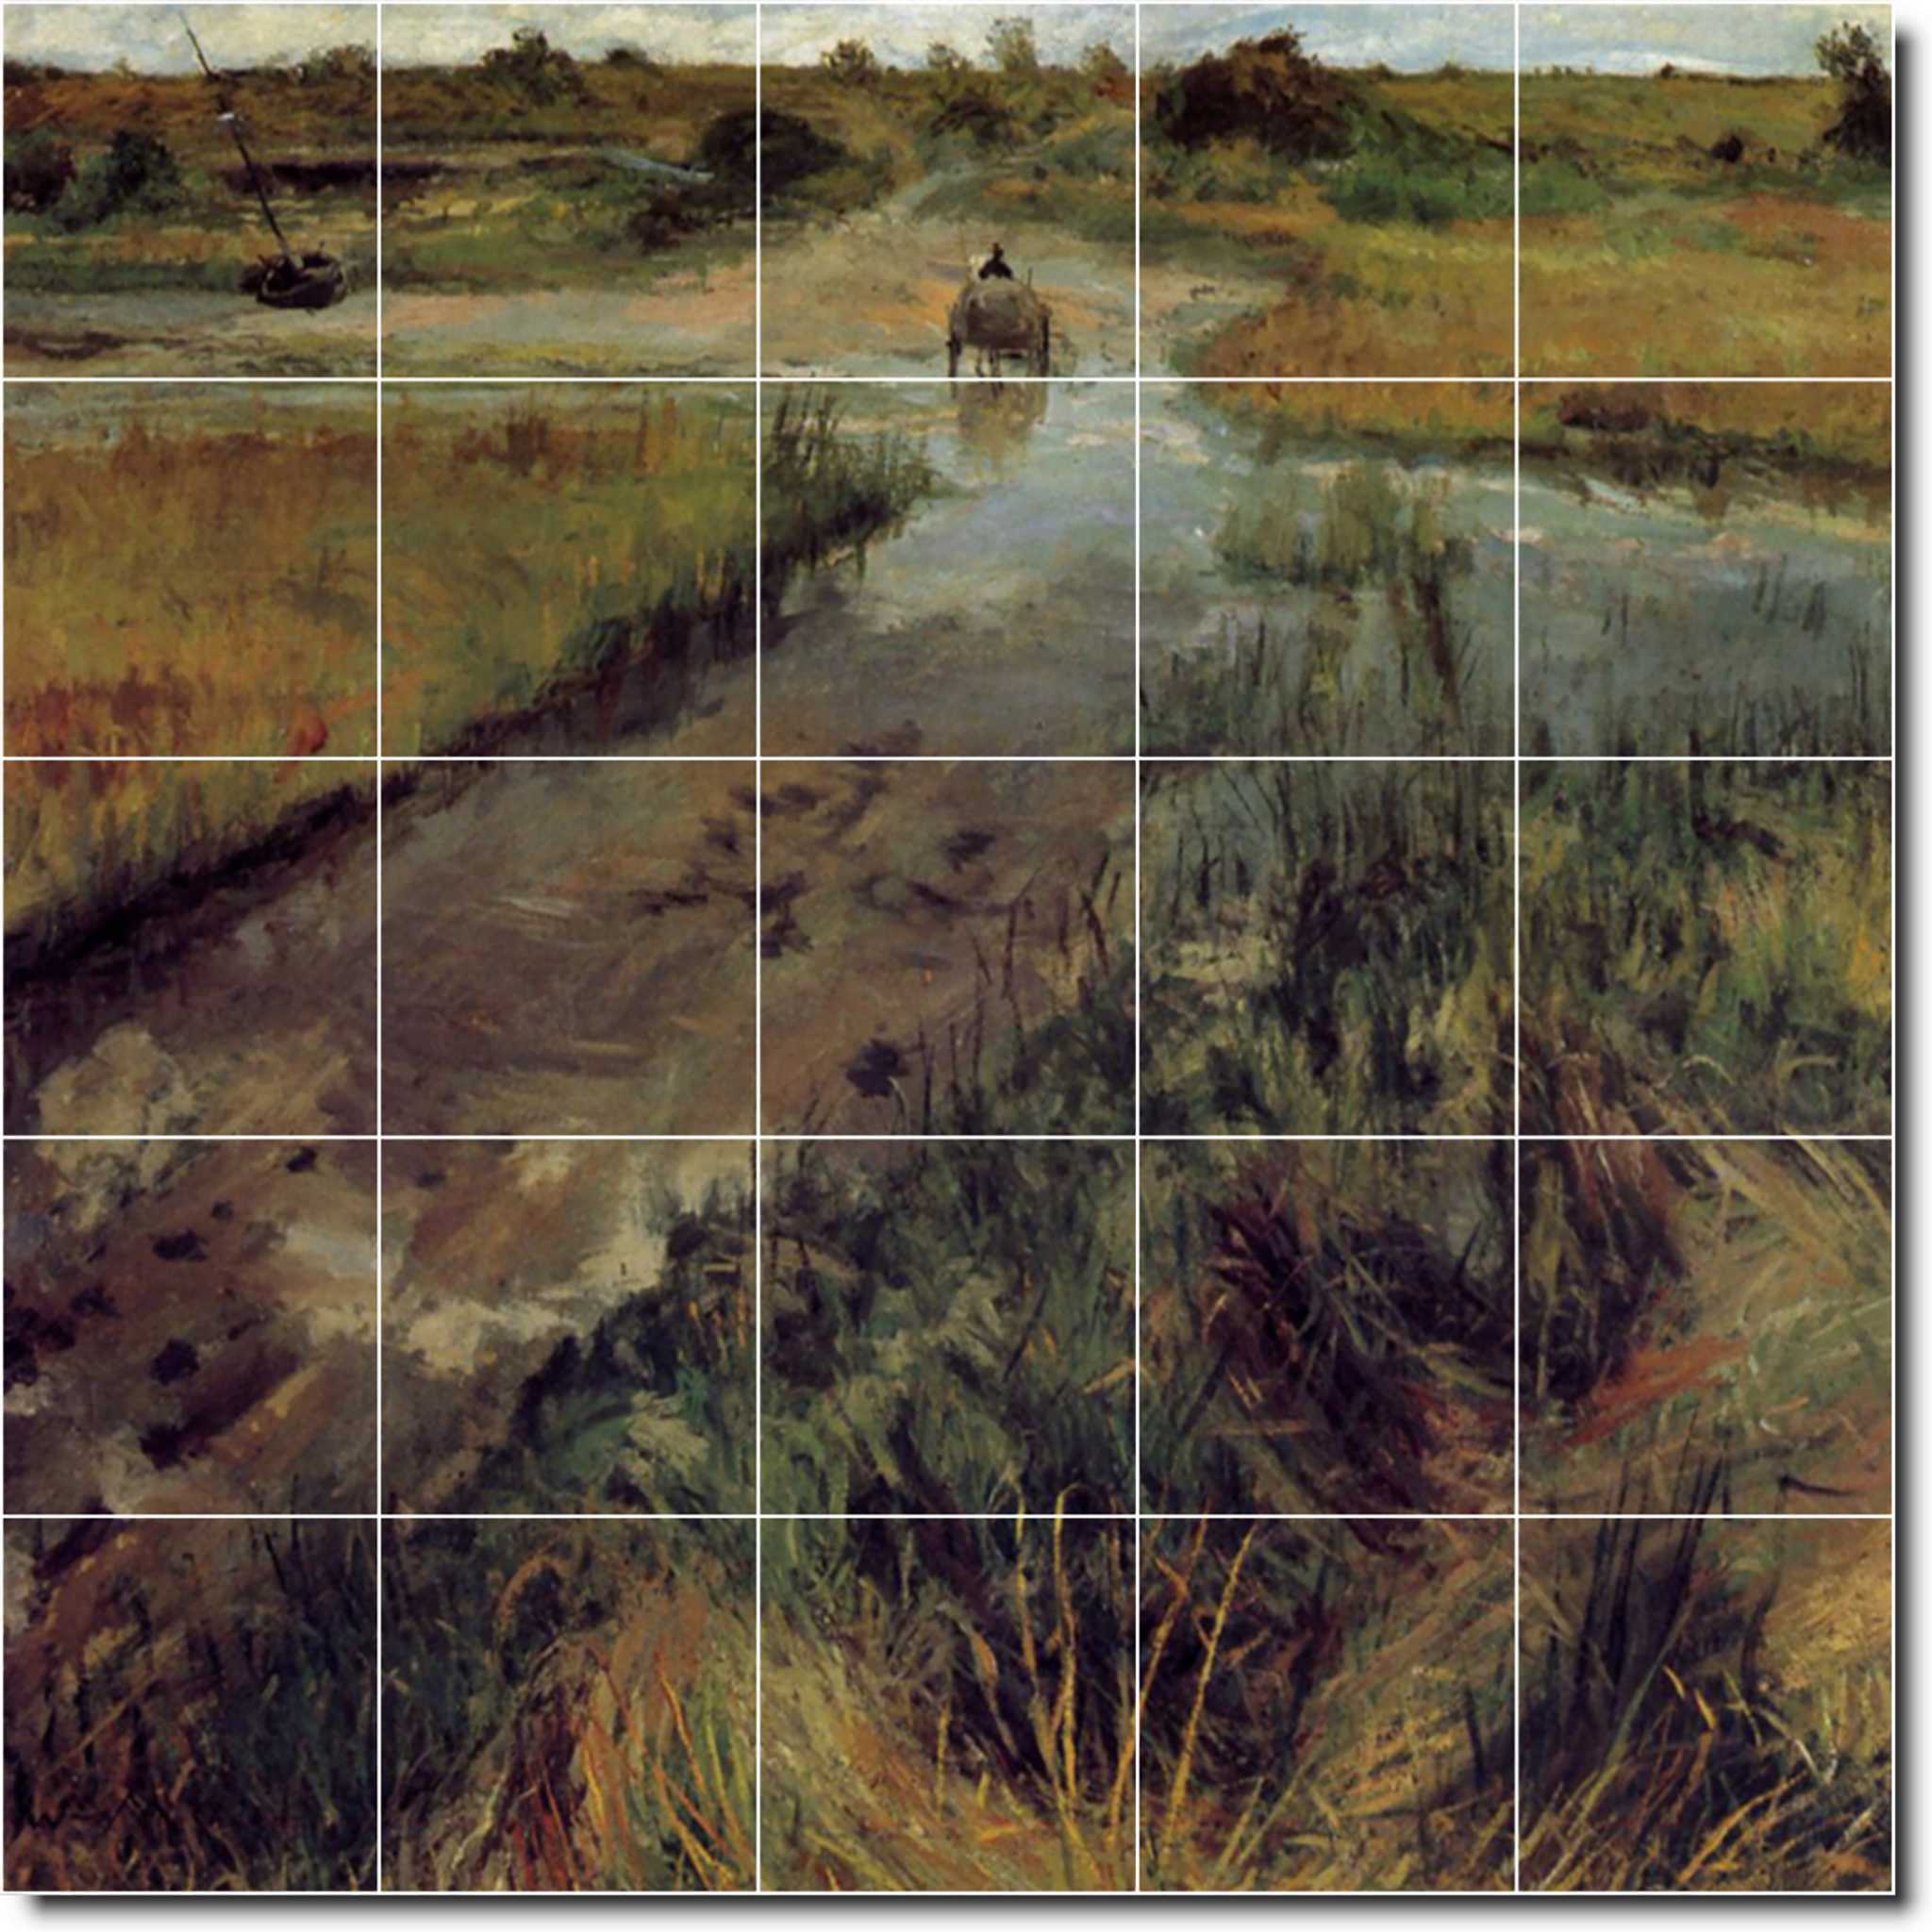 william chase country painting ceramic tile mural p01650